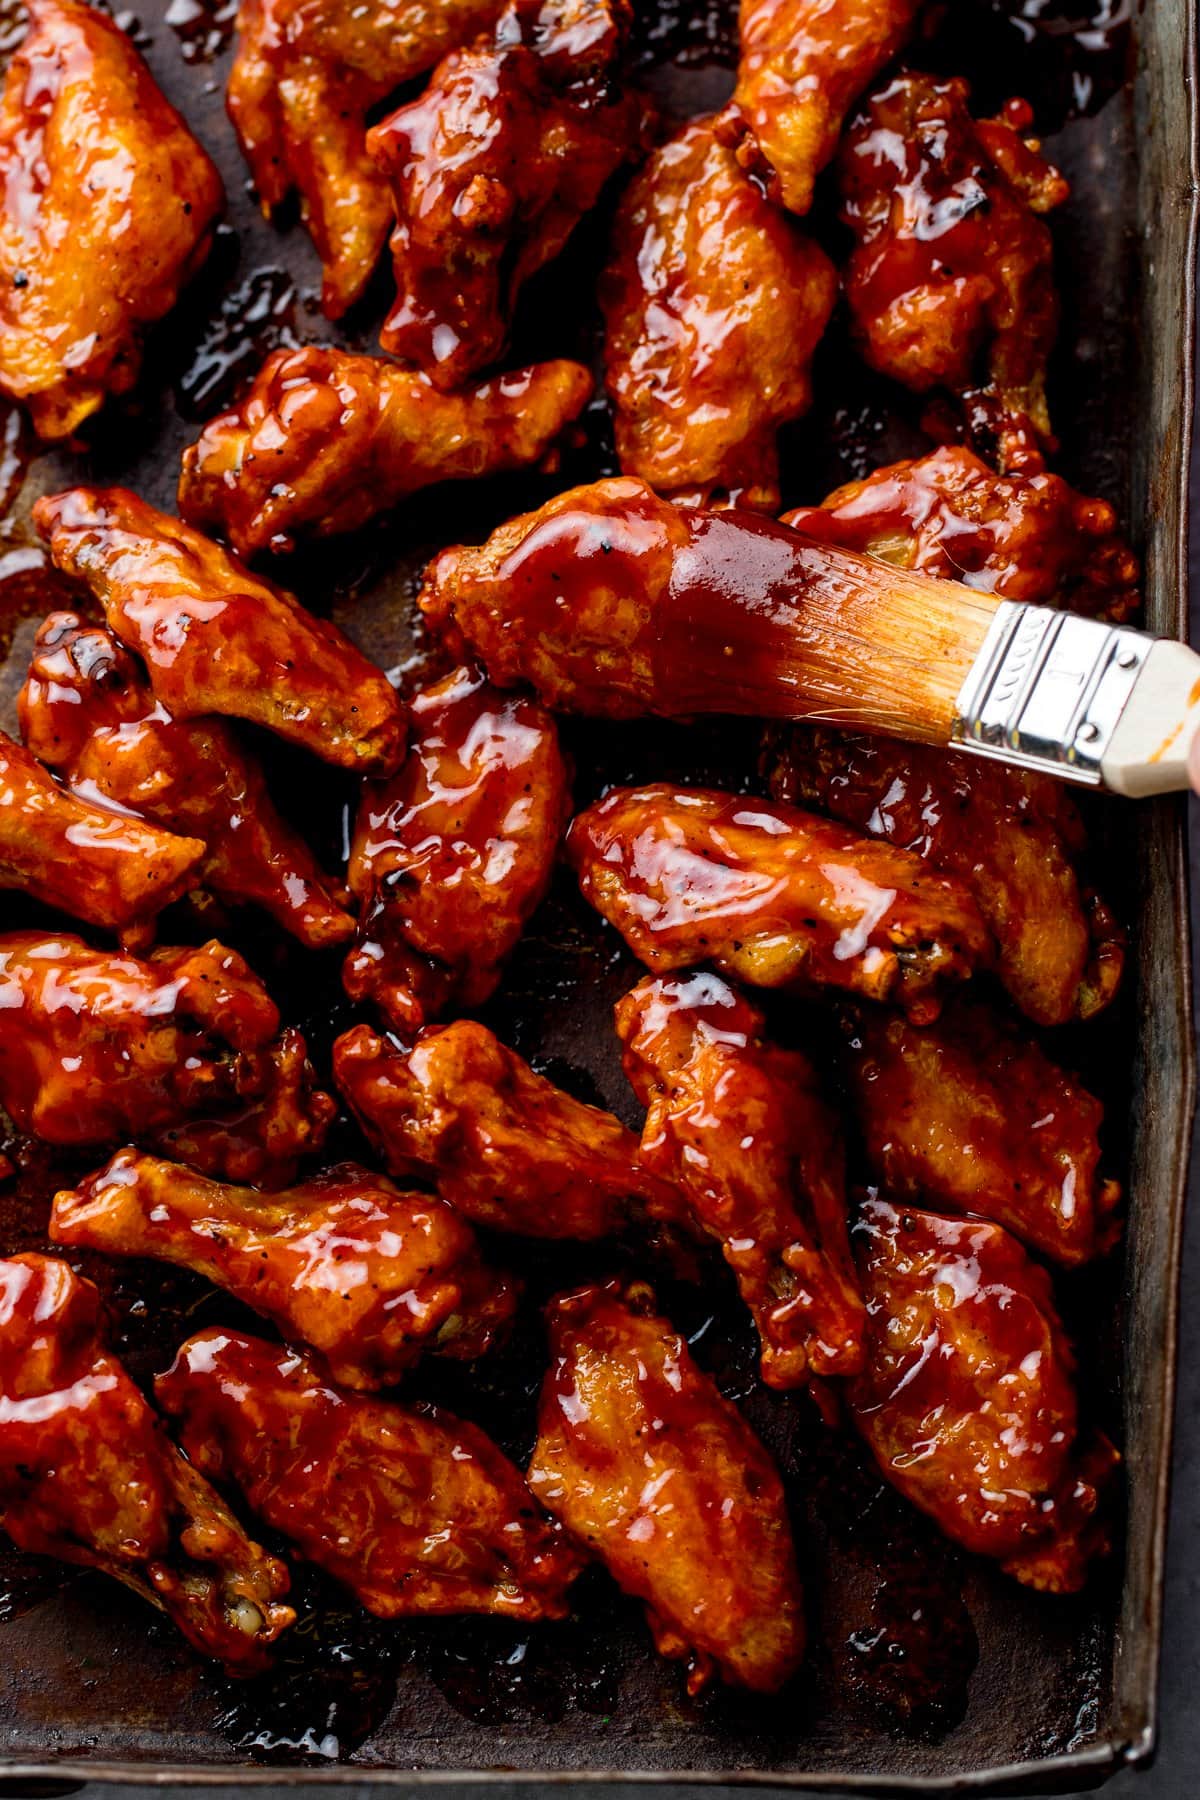 Tall image of BBQ chicken wings on a baking tray with sauce being brushed on